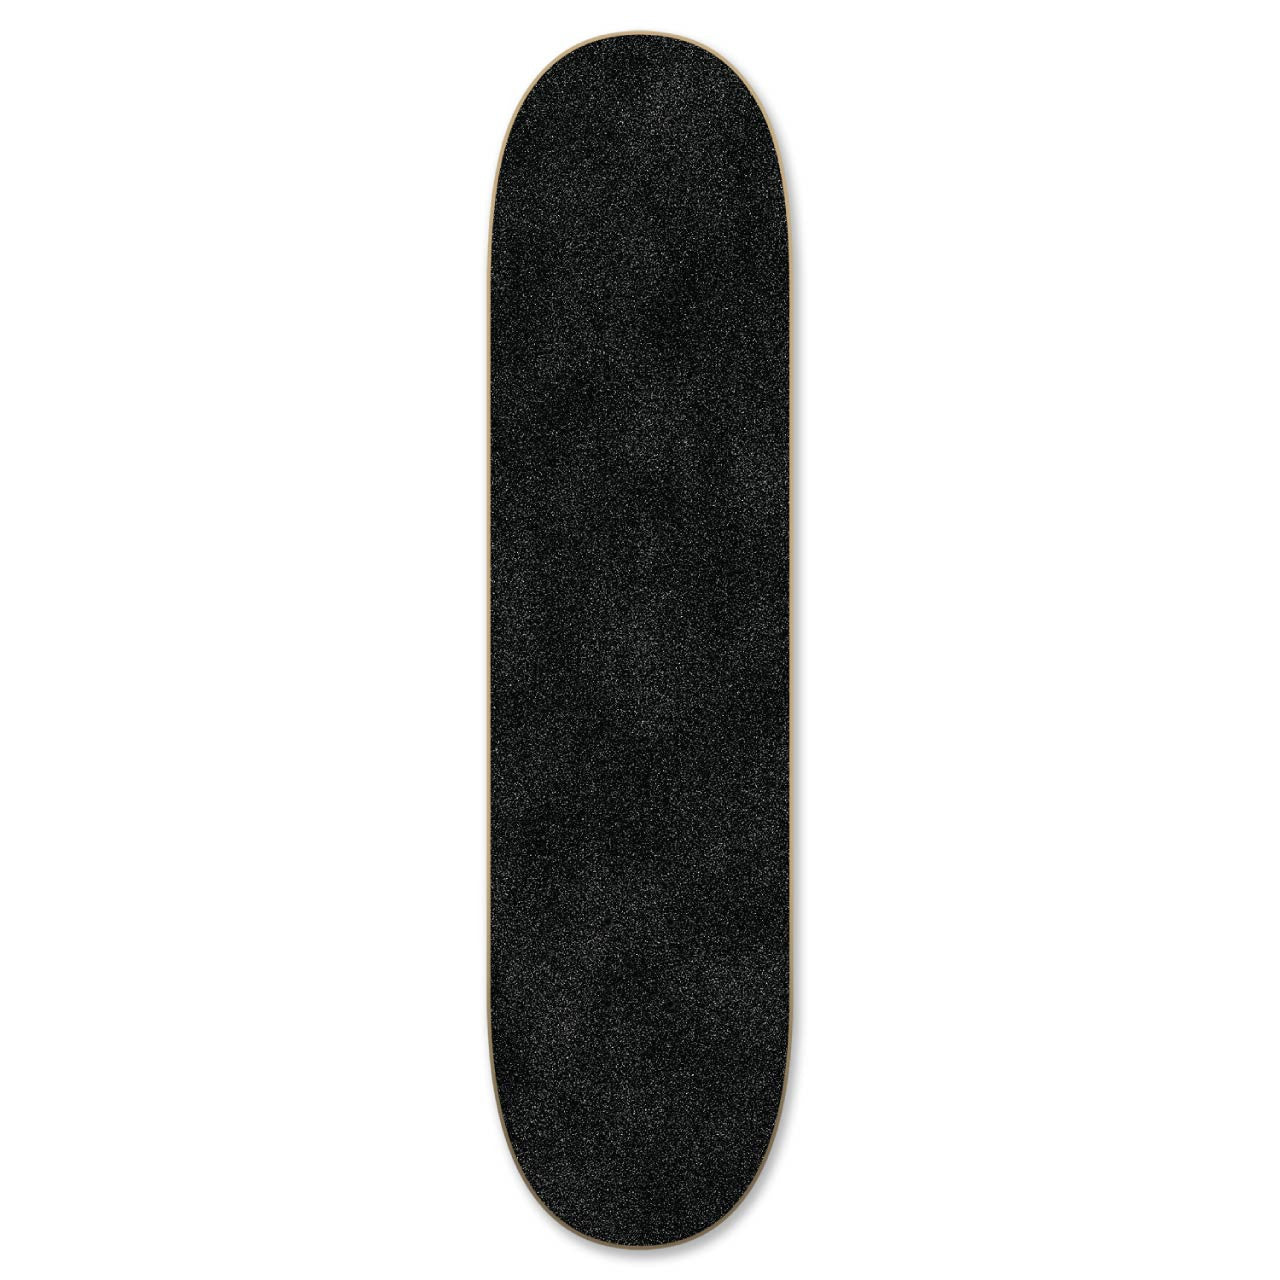 Yocaher Blank Skateboard Deck - Stained Blue